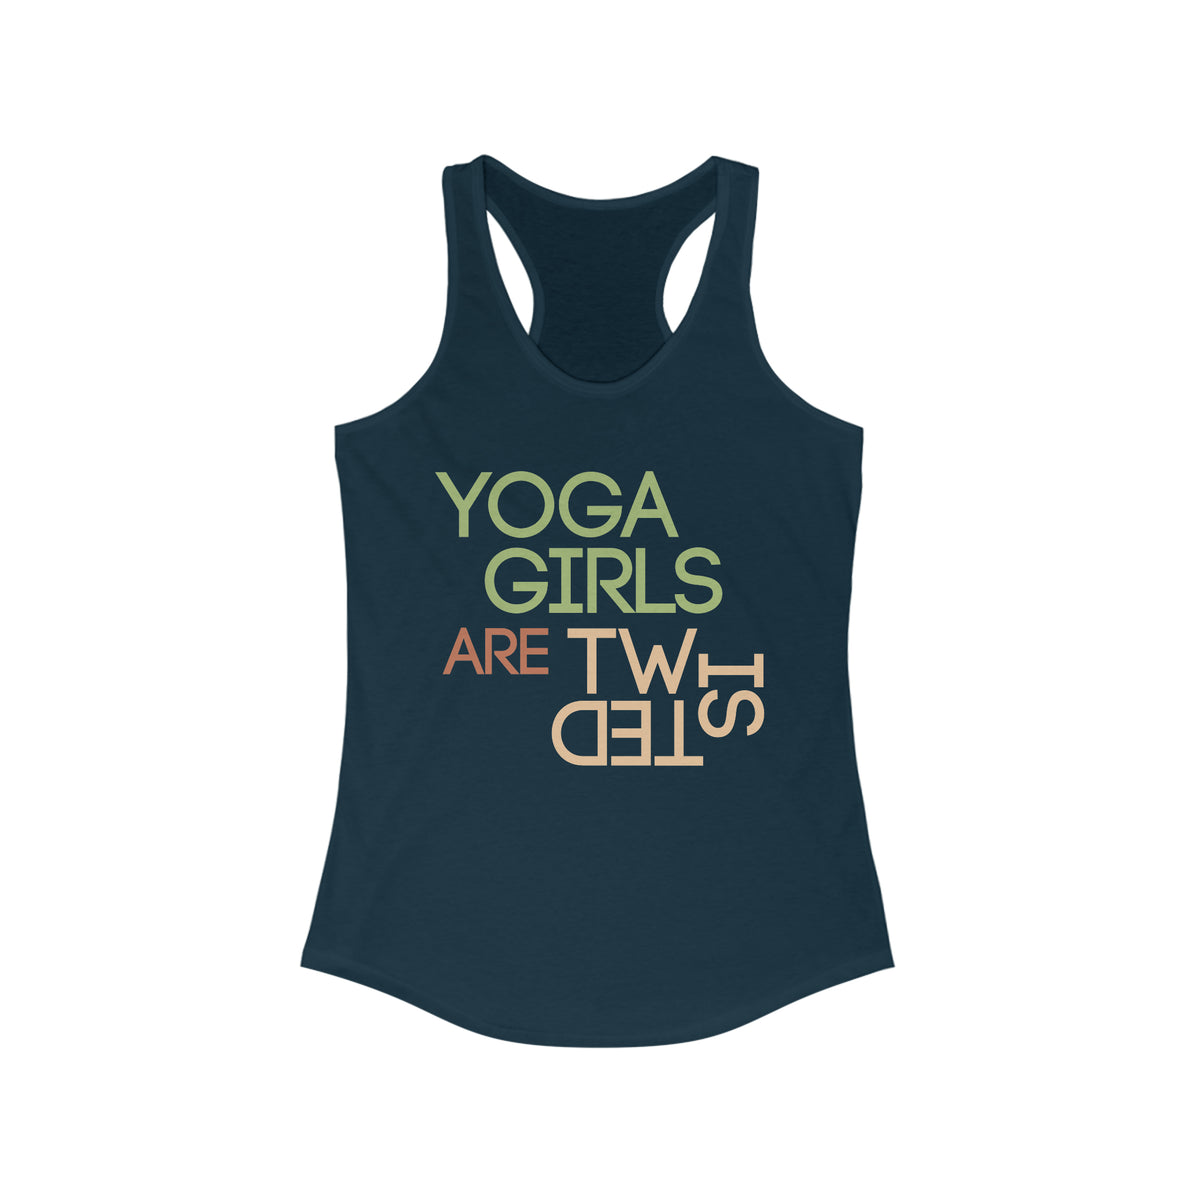 Yoga Girls Are Twisted Funny Yoga Shirt | Yoga Lovers Gift | Women's Ideal Racerback Tank